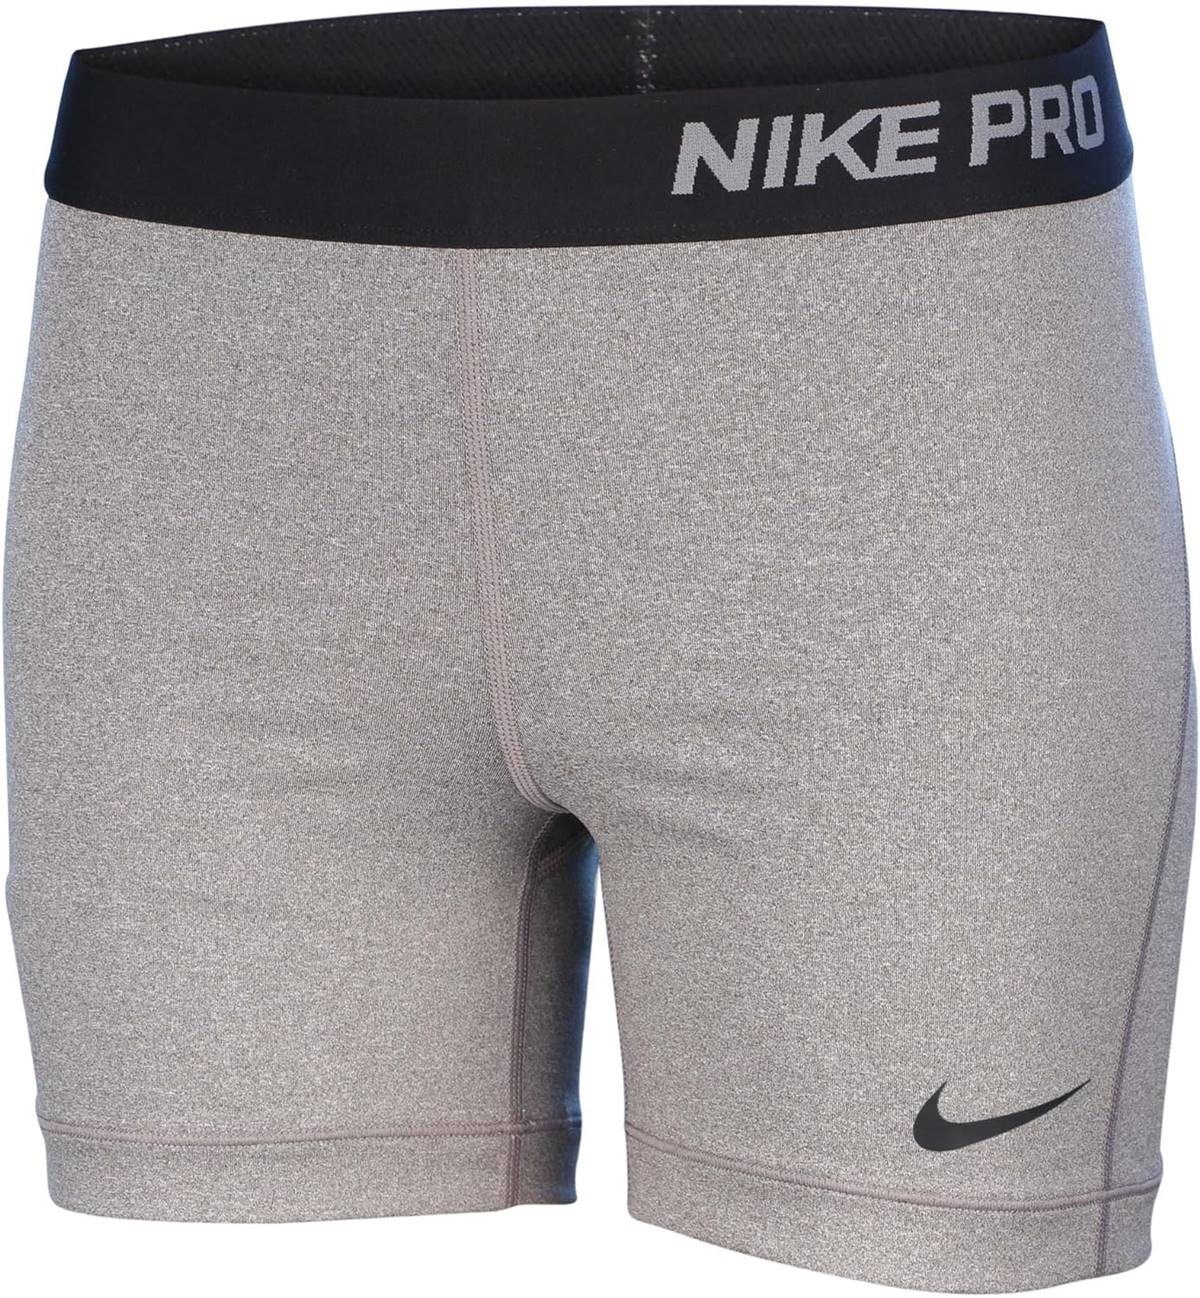 8 Best Nike Women’s Pro Compression Shorts For 2023